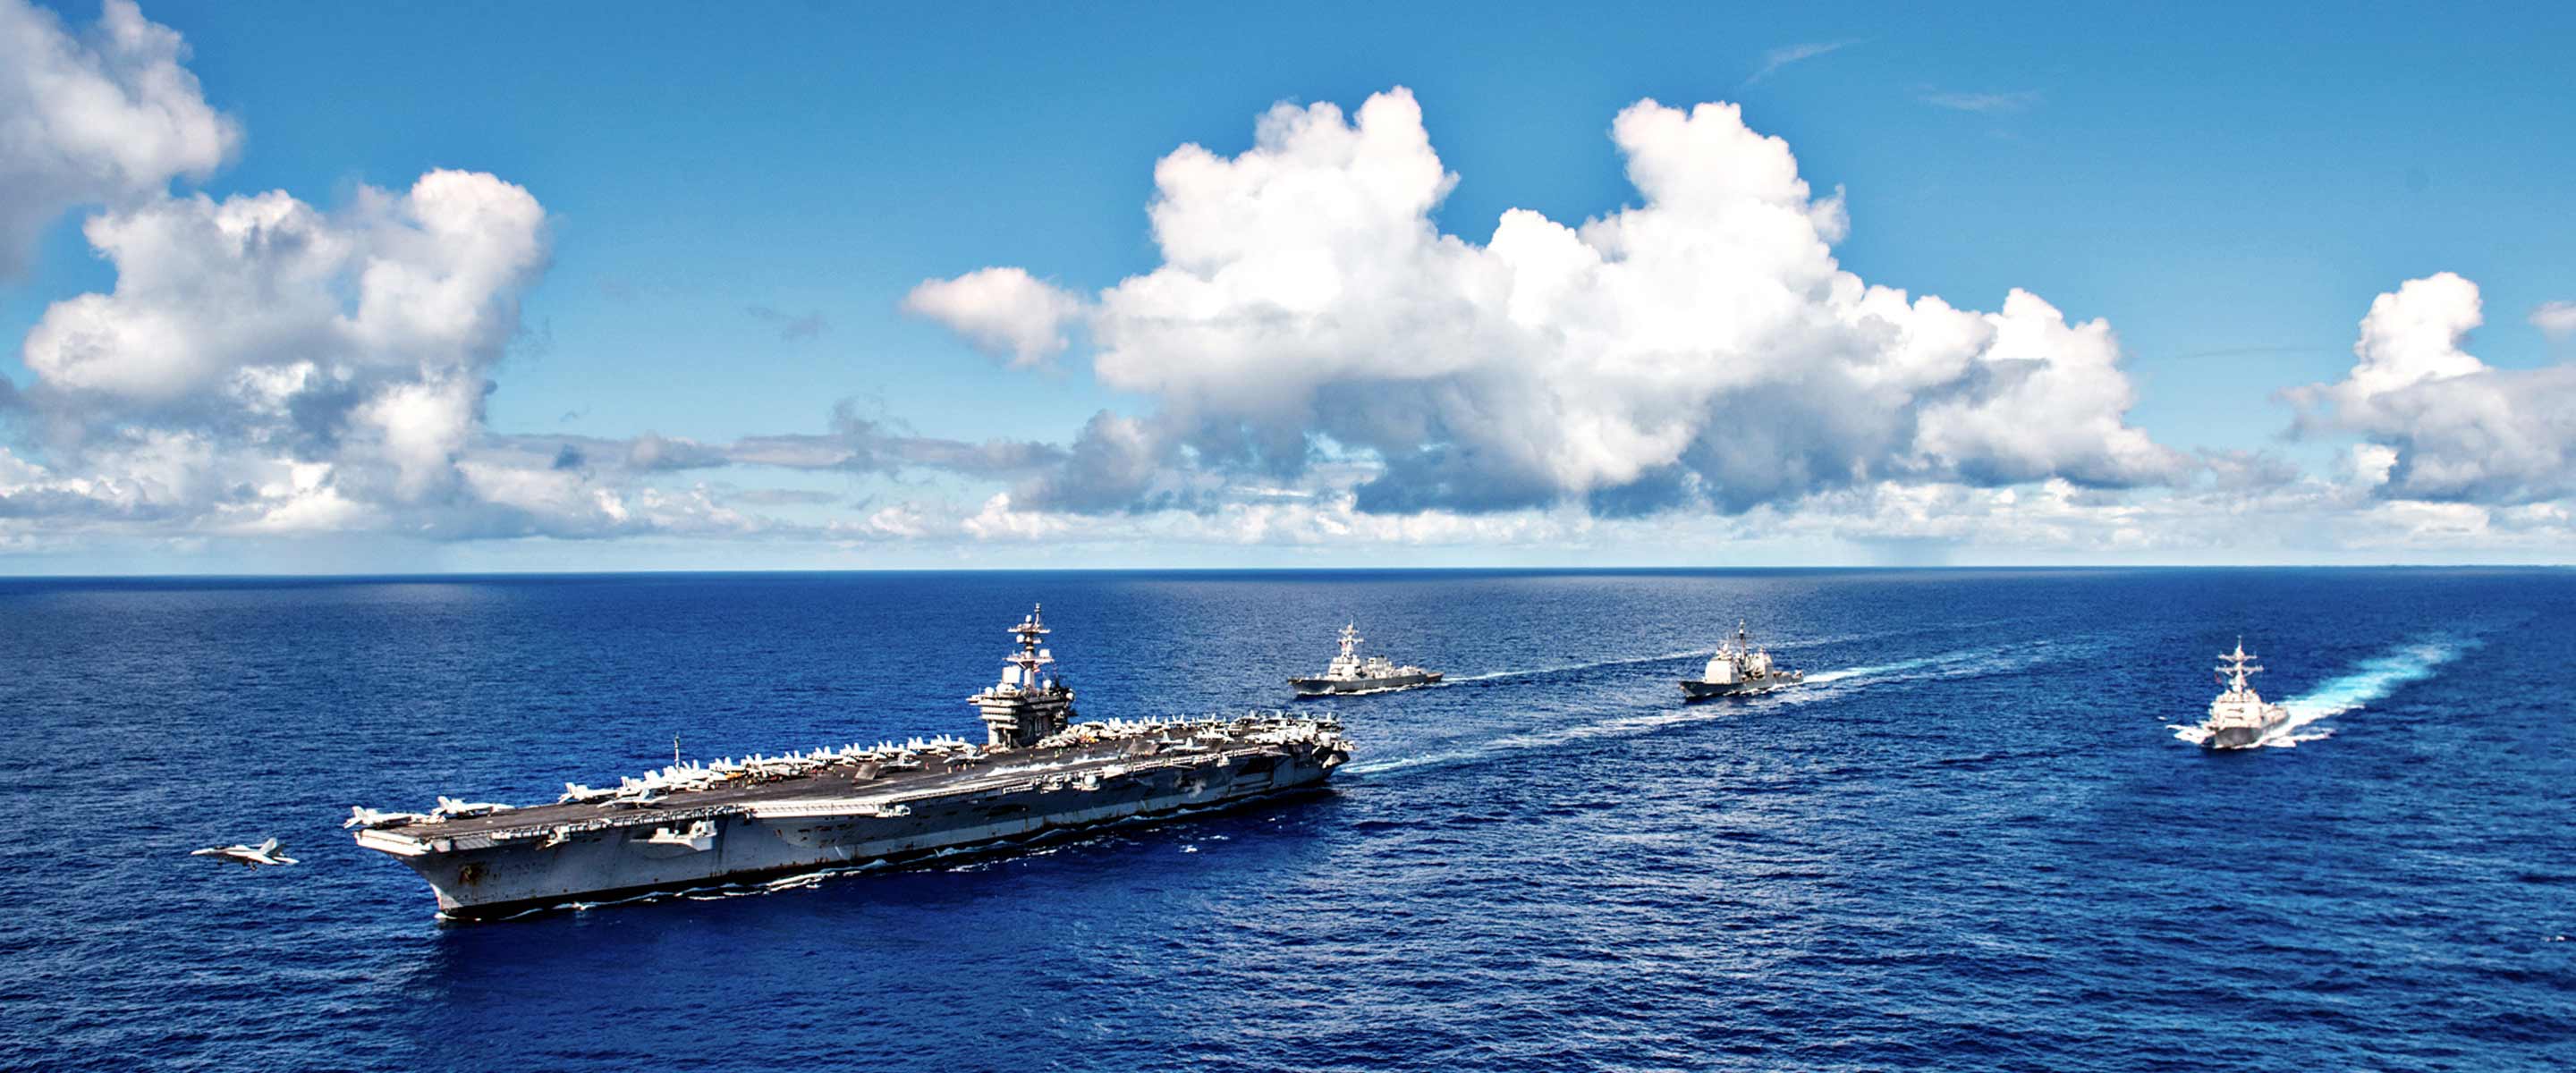 Navy strike group sails toward a mission in the ocean